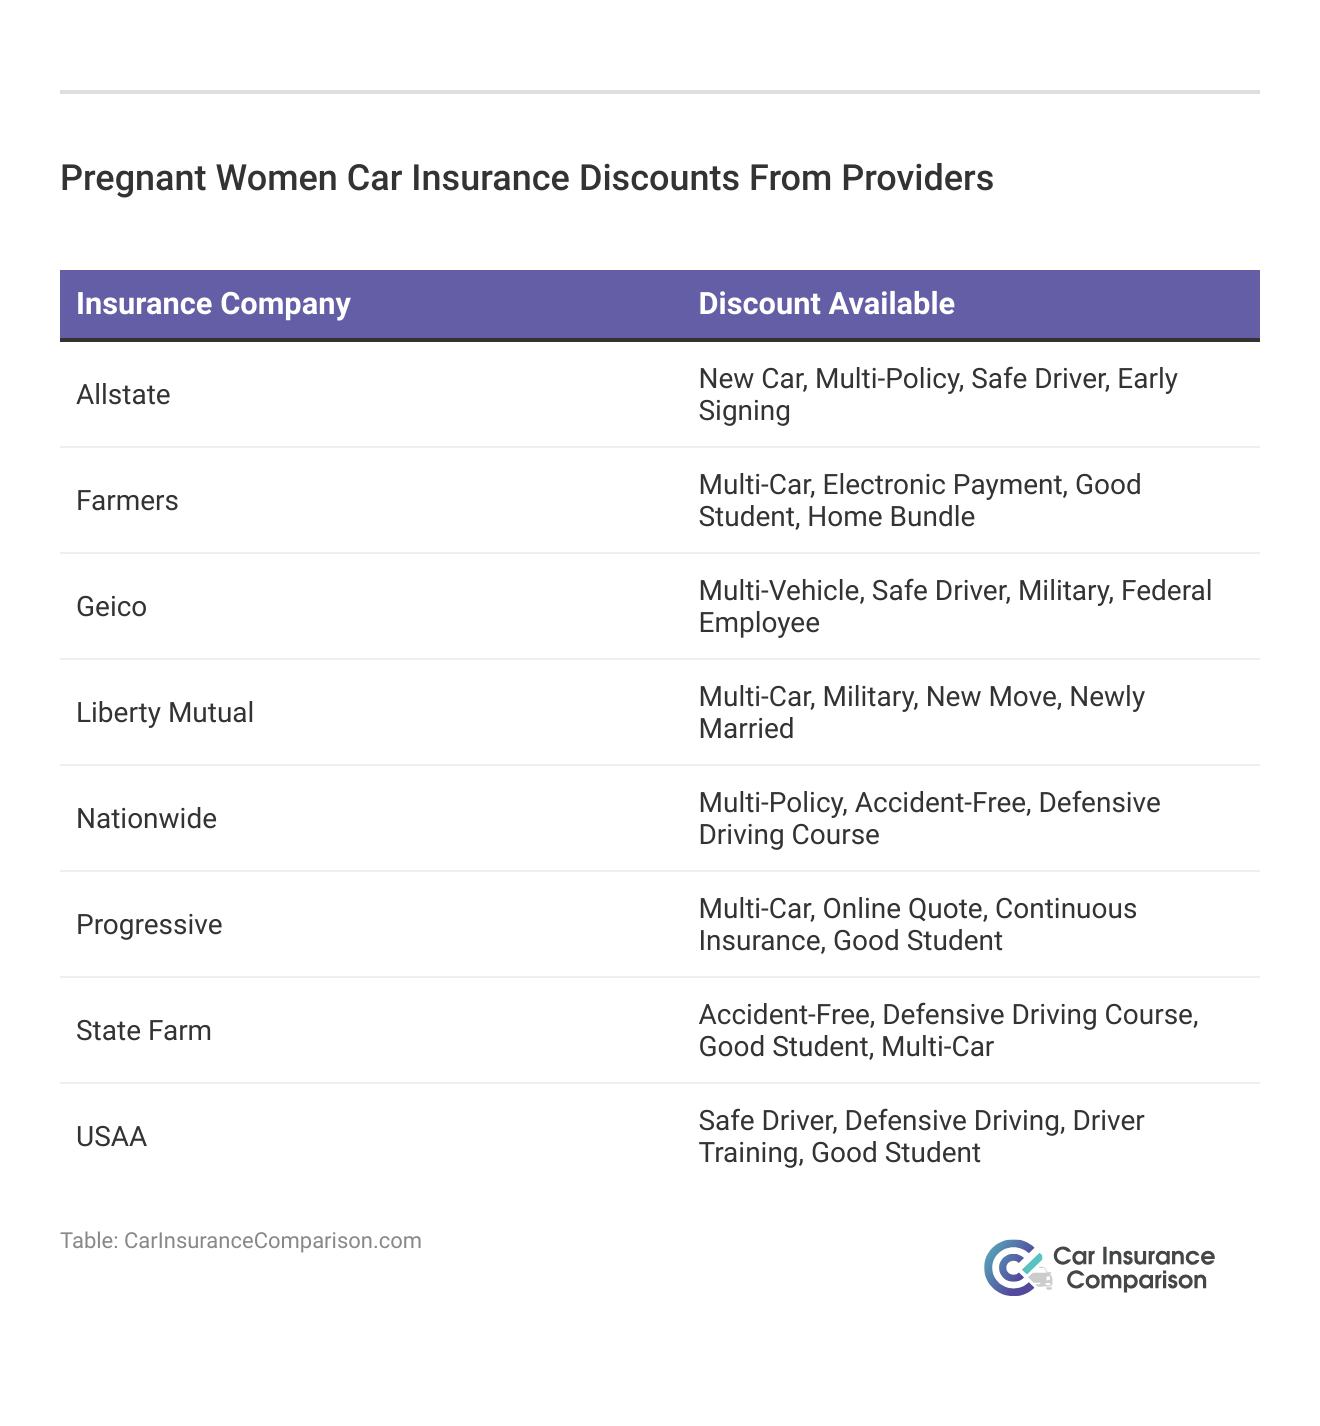 <h3>Pregnant Women Car Insurance Discounts From Providers
</h3>